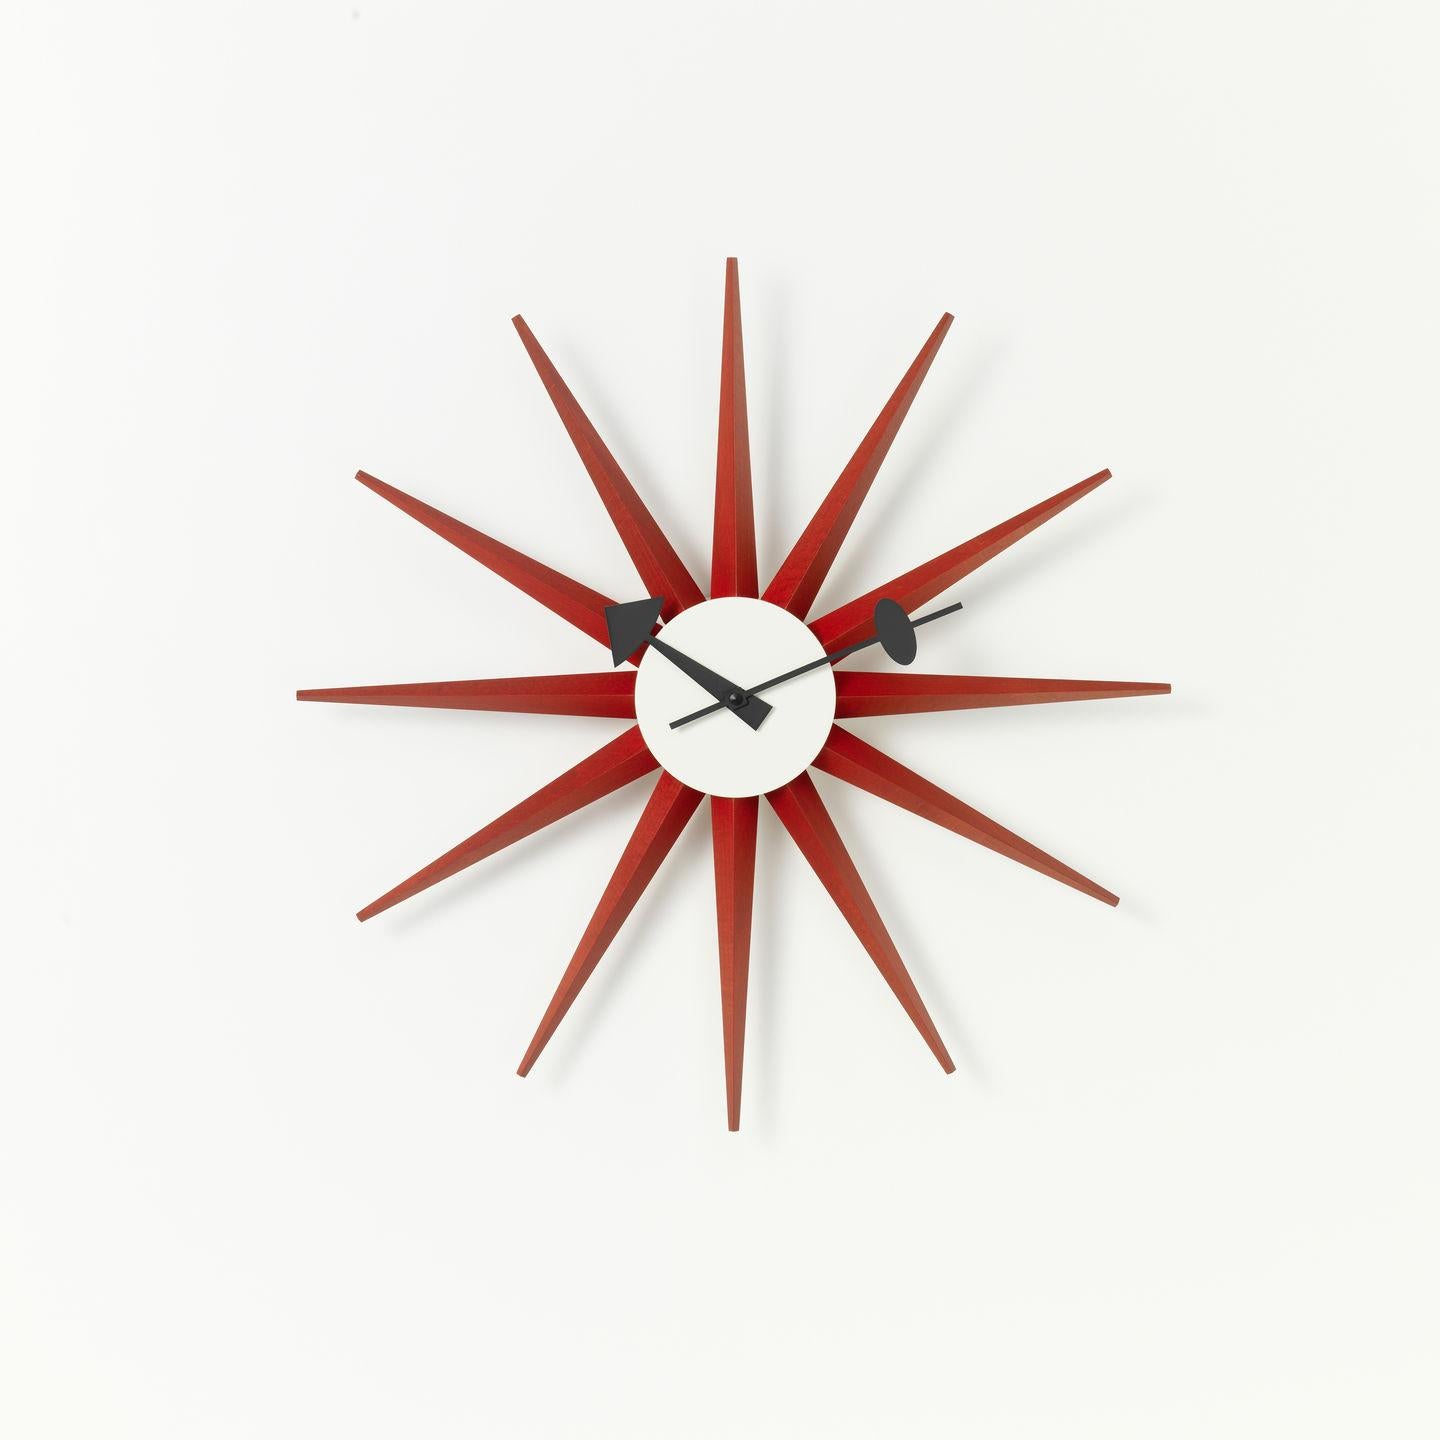 Clock designed by George Nelson in 1948/60.
Manufactured by Vitra, Switzerland.

In 1947, the American designer George Nelson was commissioned to create a collection of clocks. Nelson analysed how people used clocks and concluded that they read